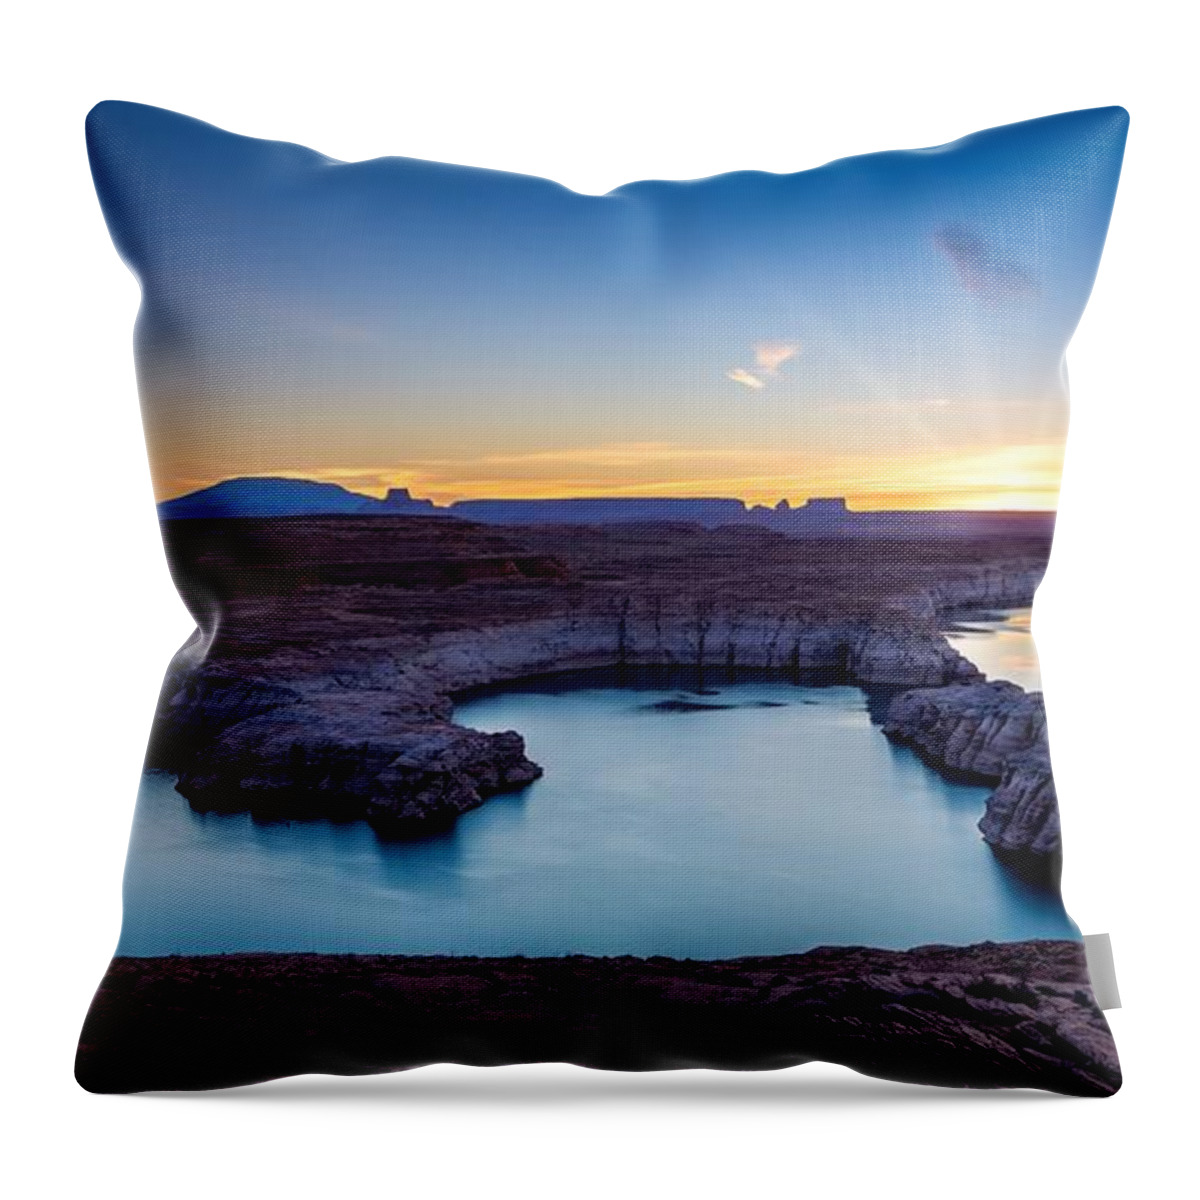 Lake Powell Throw Pillow featuring the photograph Lake Powell Sunrise by Bradley Morris